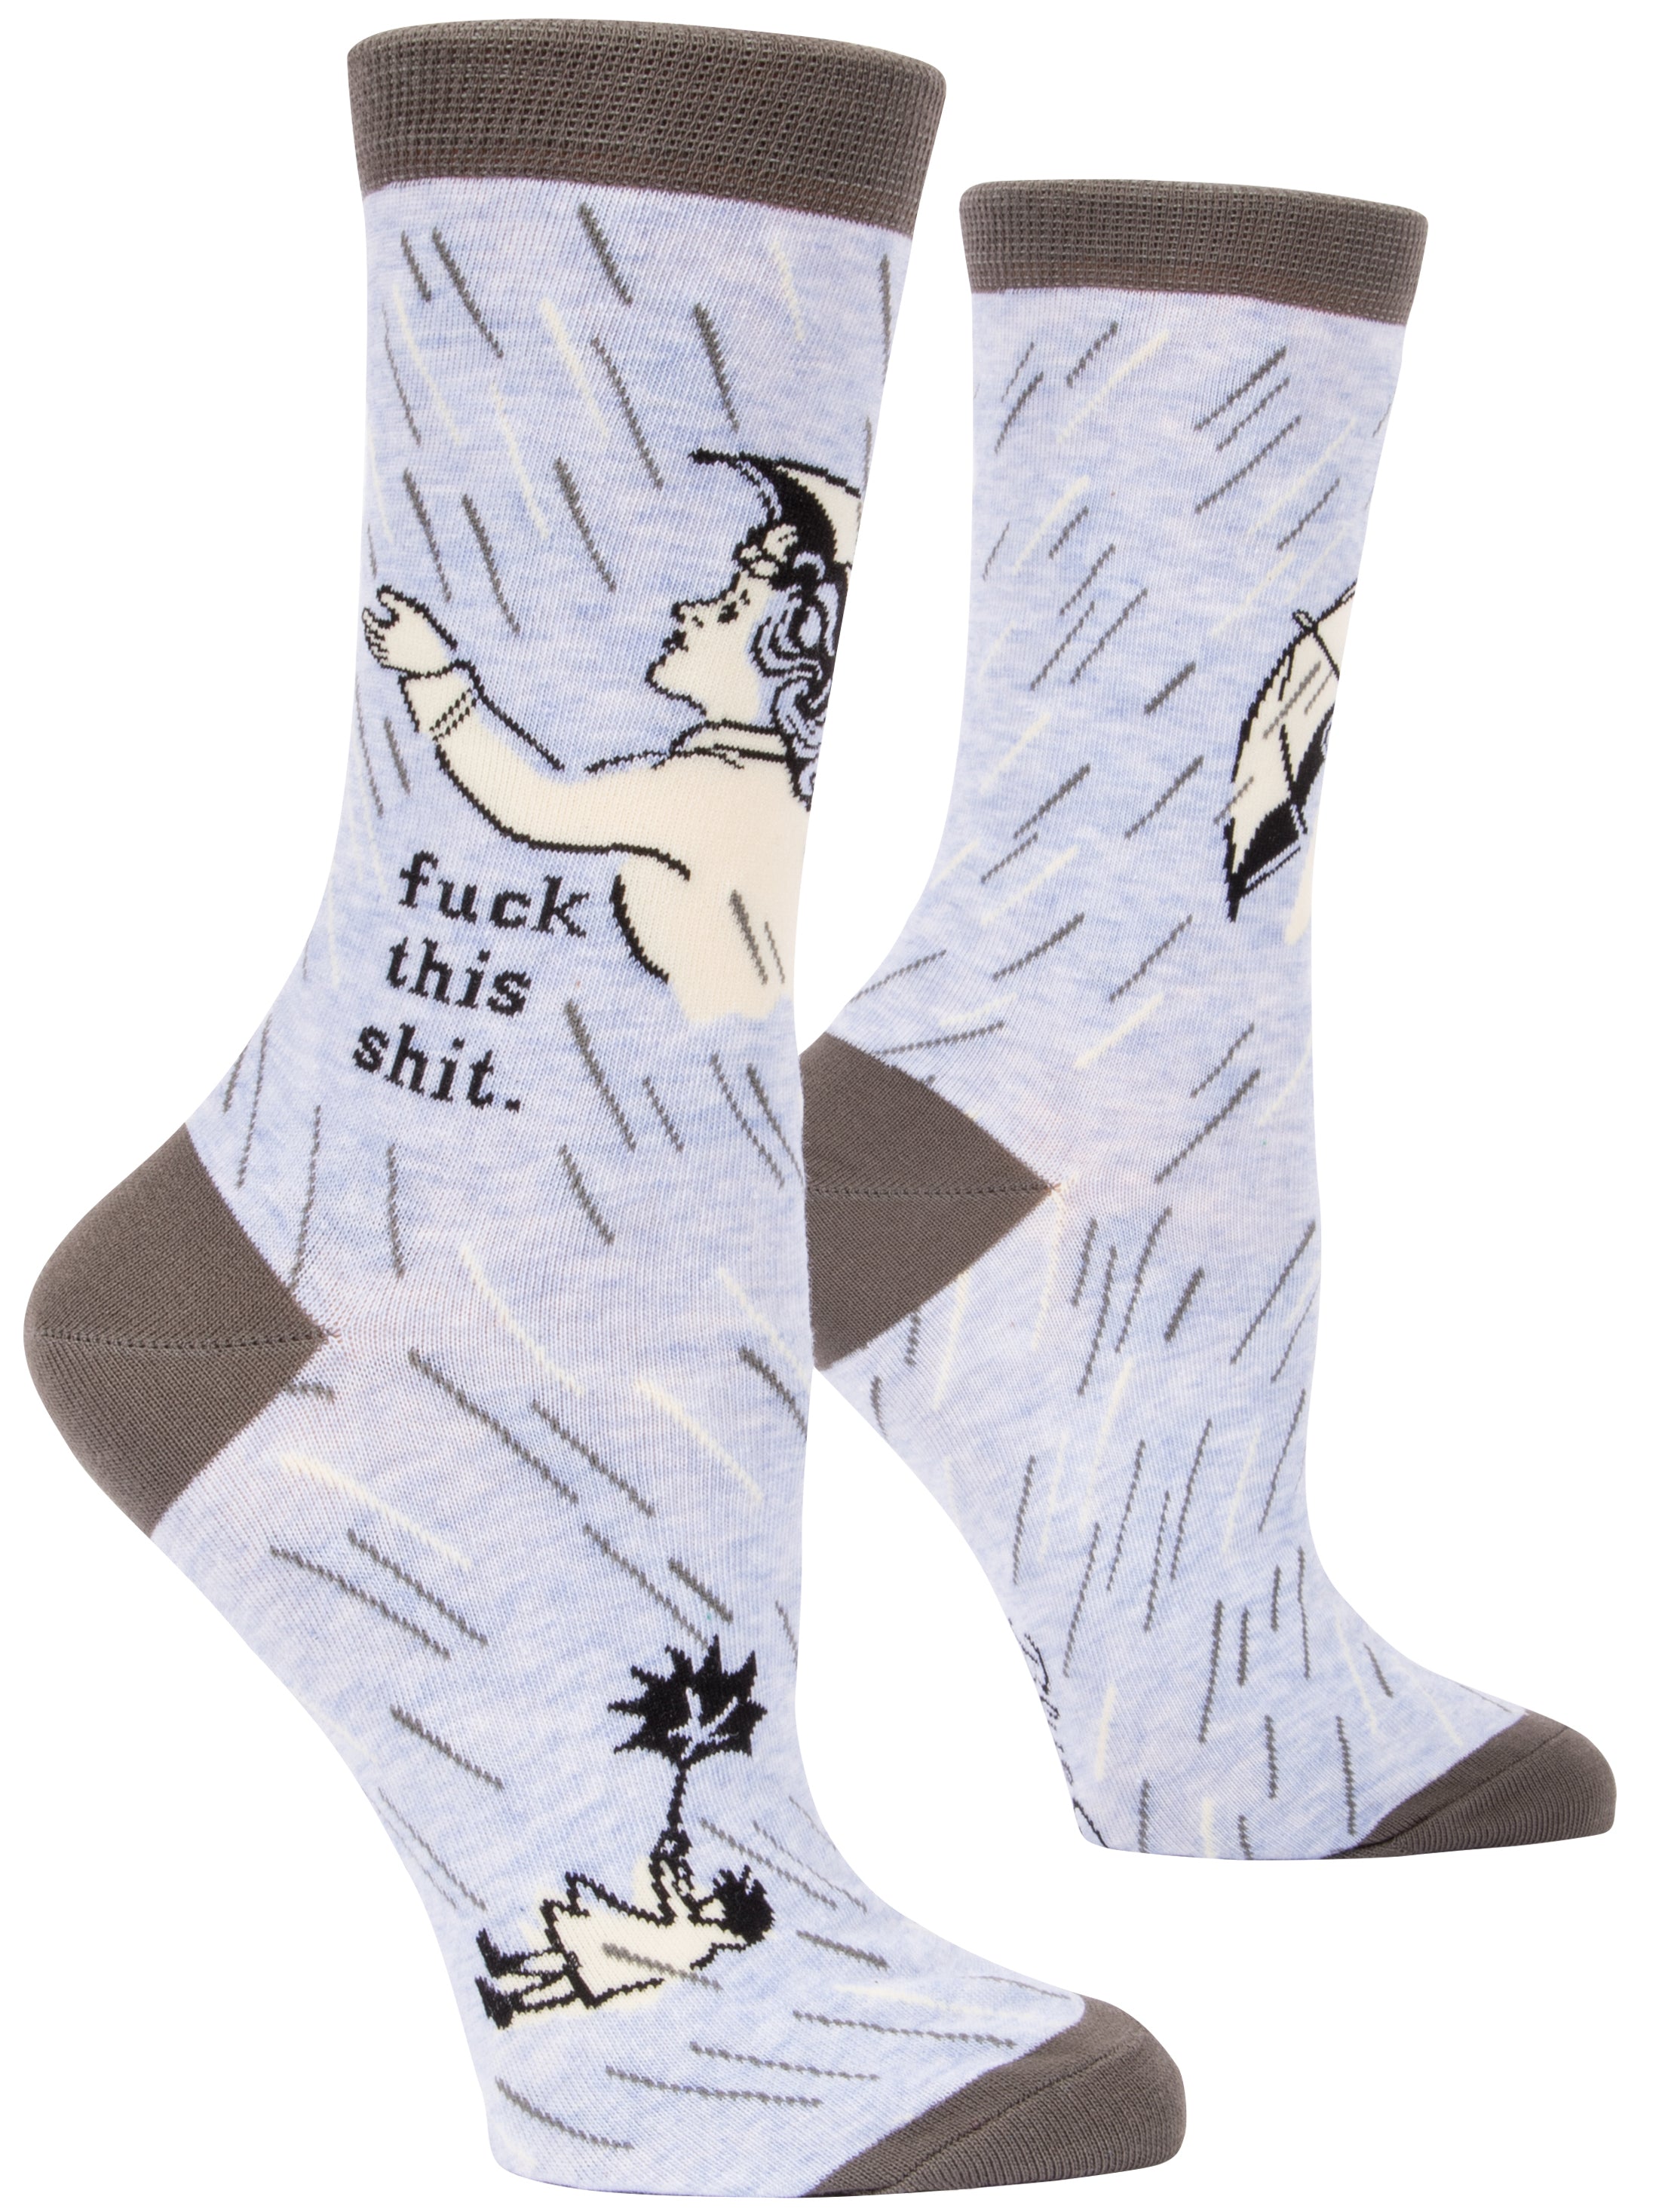 light blue socks with grey tips and cartoon of someone in the rain with an umbrella and it says fuck this shit